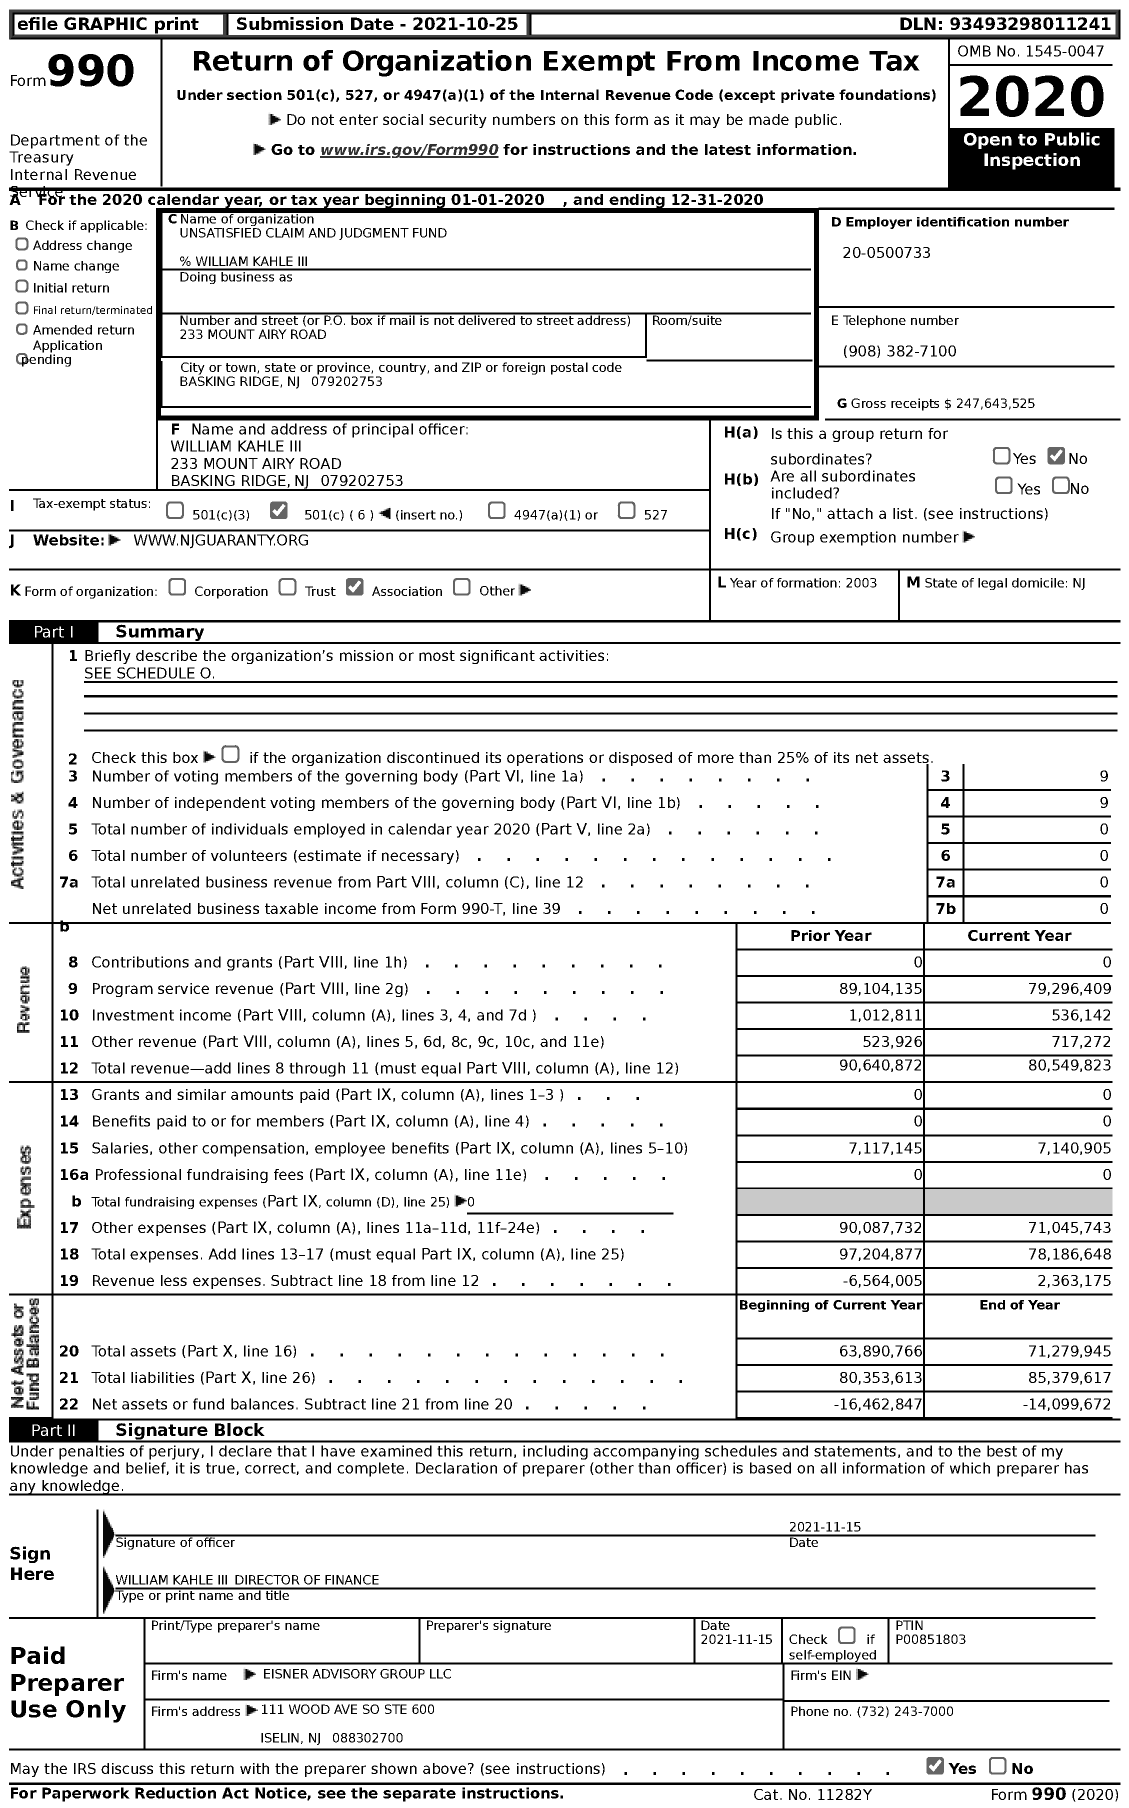 Image of first page of 2020 Form 990 for Unsatisfied Claim and Judgment Fund (UCJF)